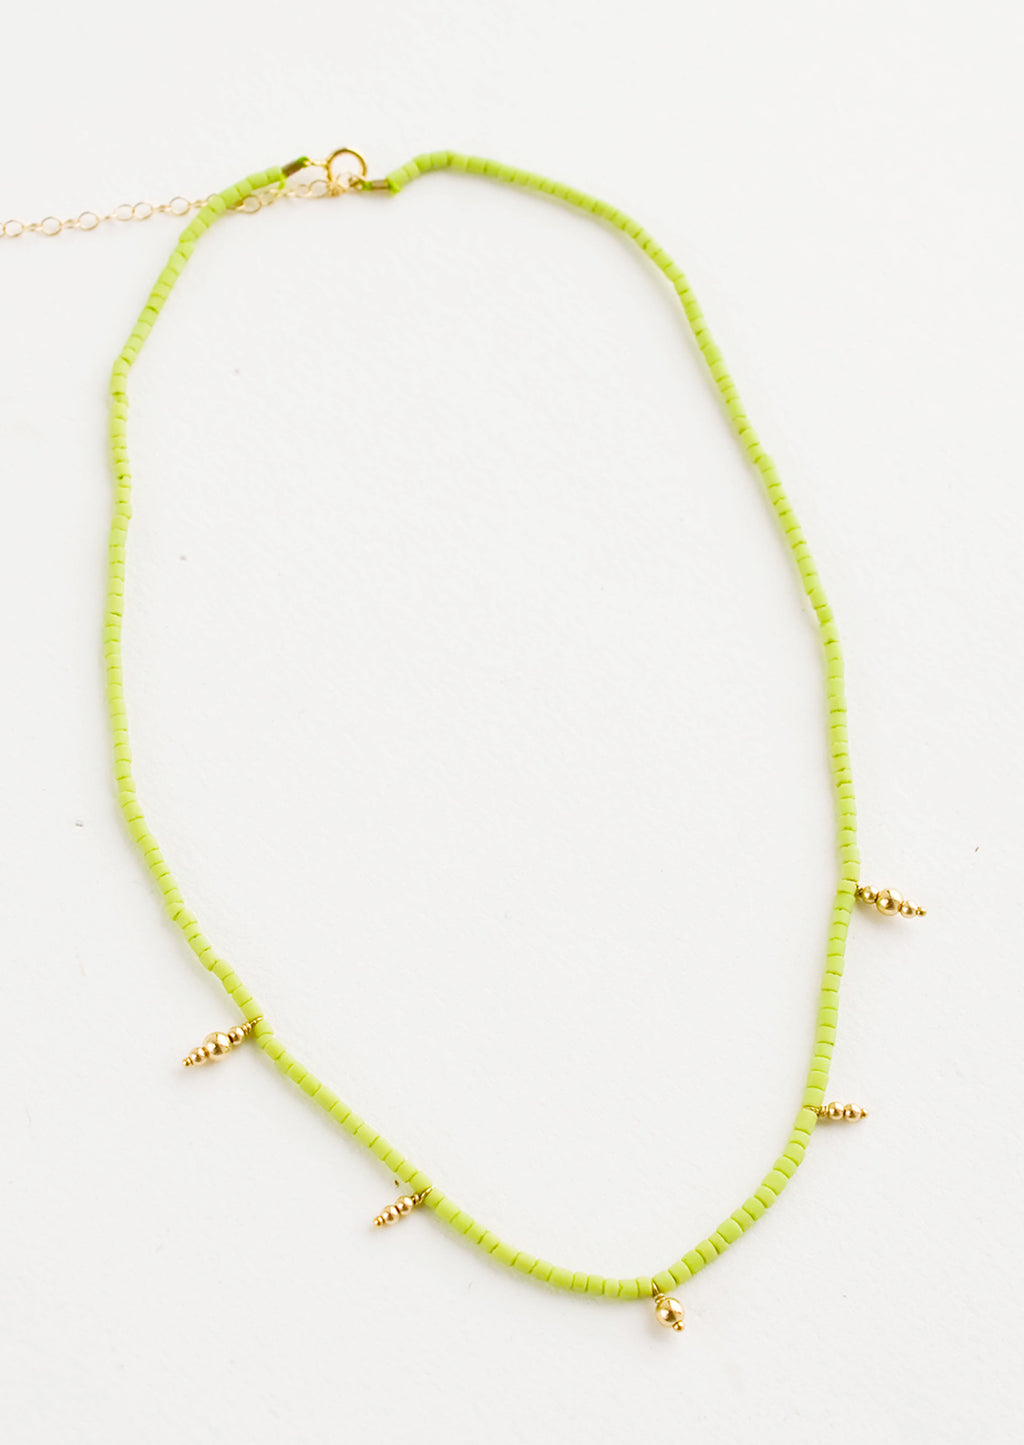 Lime: Beaded necklace with small lime green and gold beads